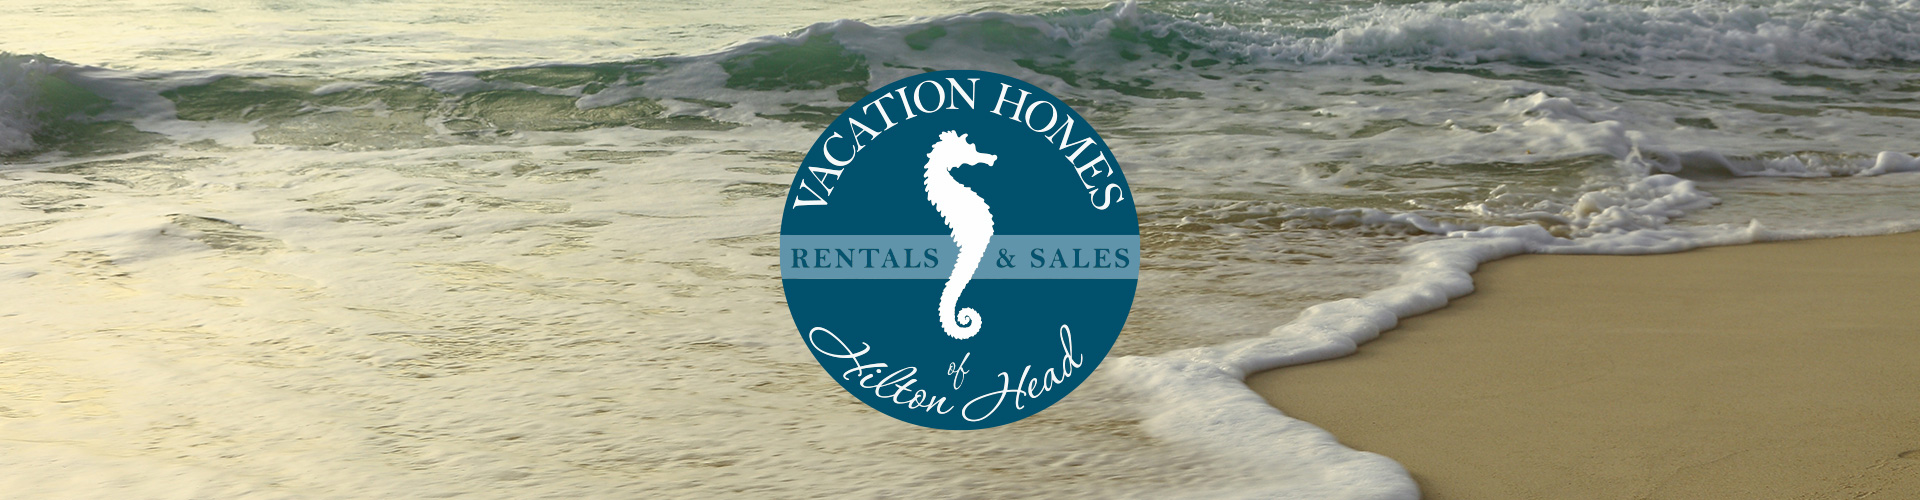 Vacation Homes of Hilton Head Banner